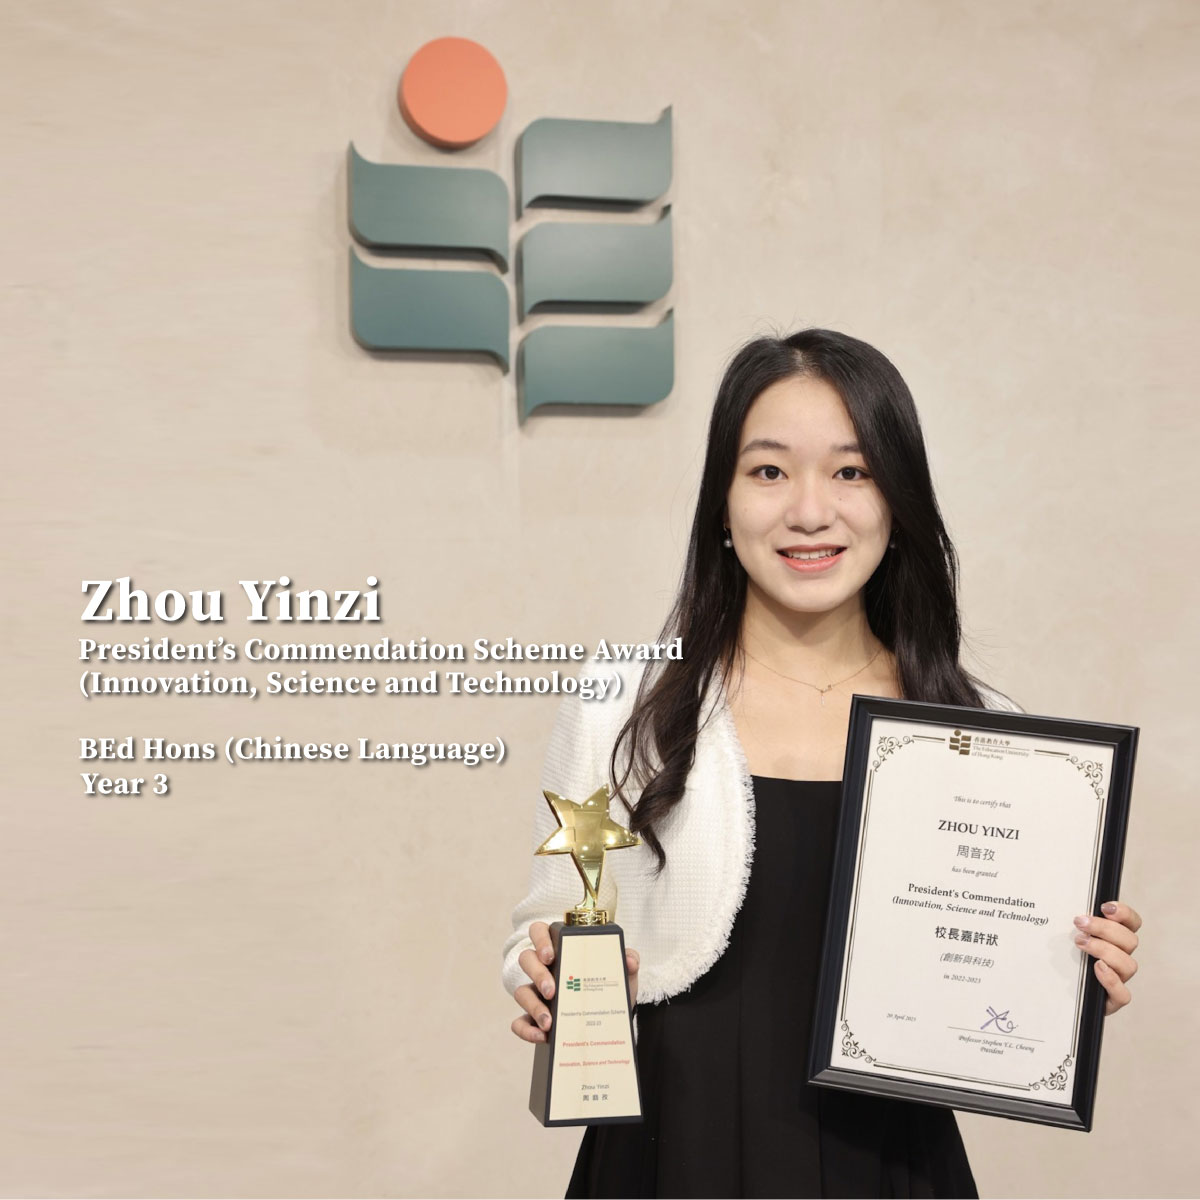 Zhou Yinzi, the recipient of the President’s Commendation Award (Innovation, Science and Technology)